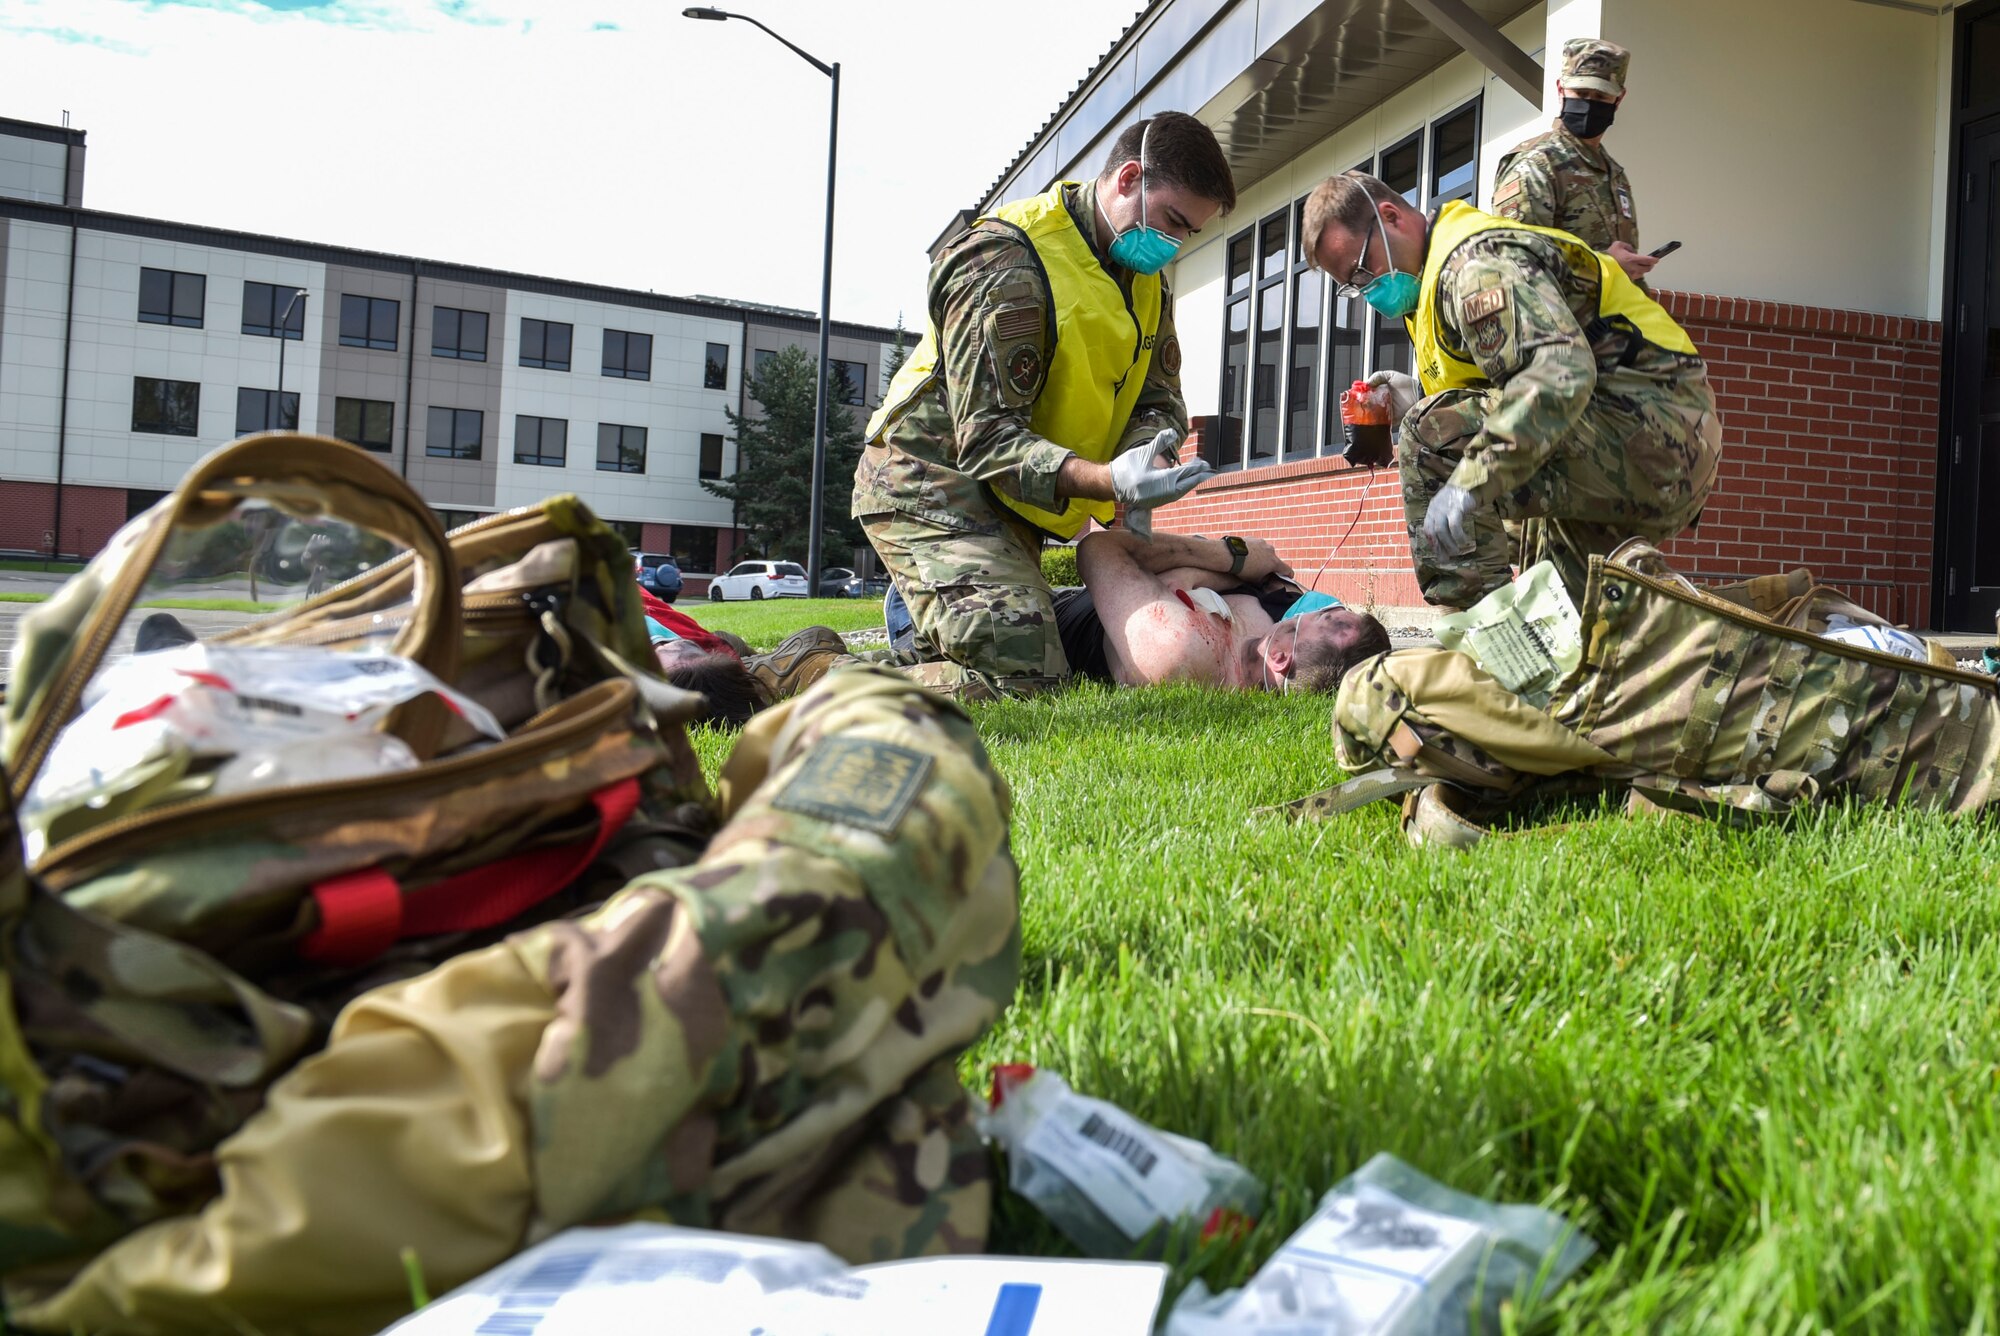 Members of the 92nd Medical Group perform triage on a simulated patient during Exercise Ready Eagle at Fairchild Air Force Base, Washington, Aug. 27, 2021.